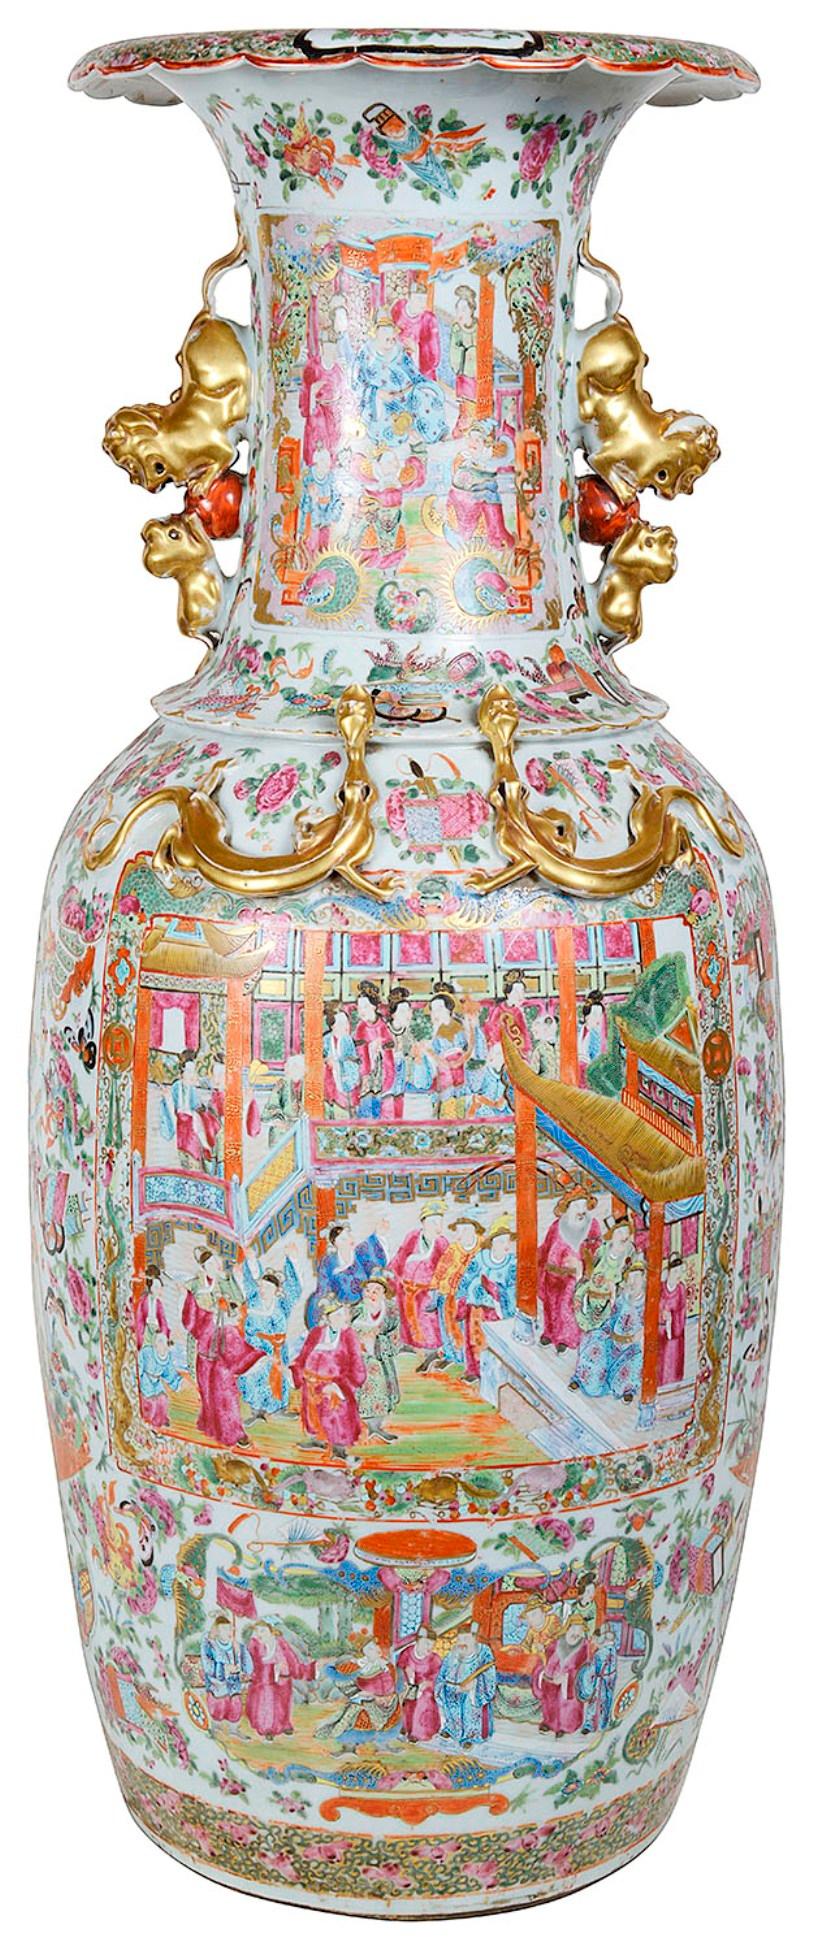 A large very good quality 19th century Chinese Cantonese (Rose medallion) vase, having the classical green ground with classical scrolling foliate and motif decoration, inset painted panels depicting wonderful scenes of courtiers in gardens and